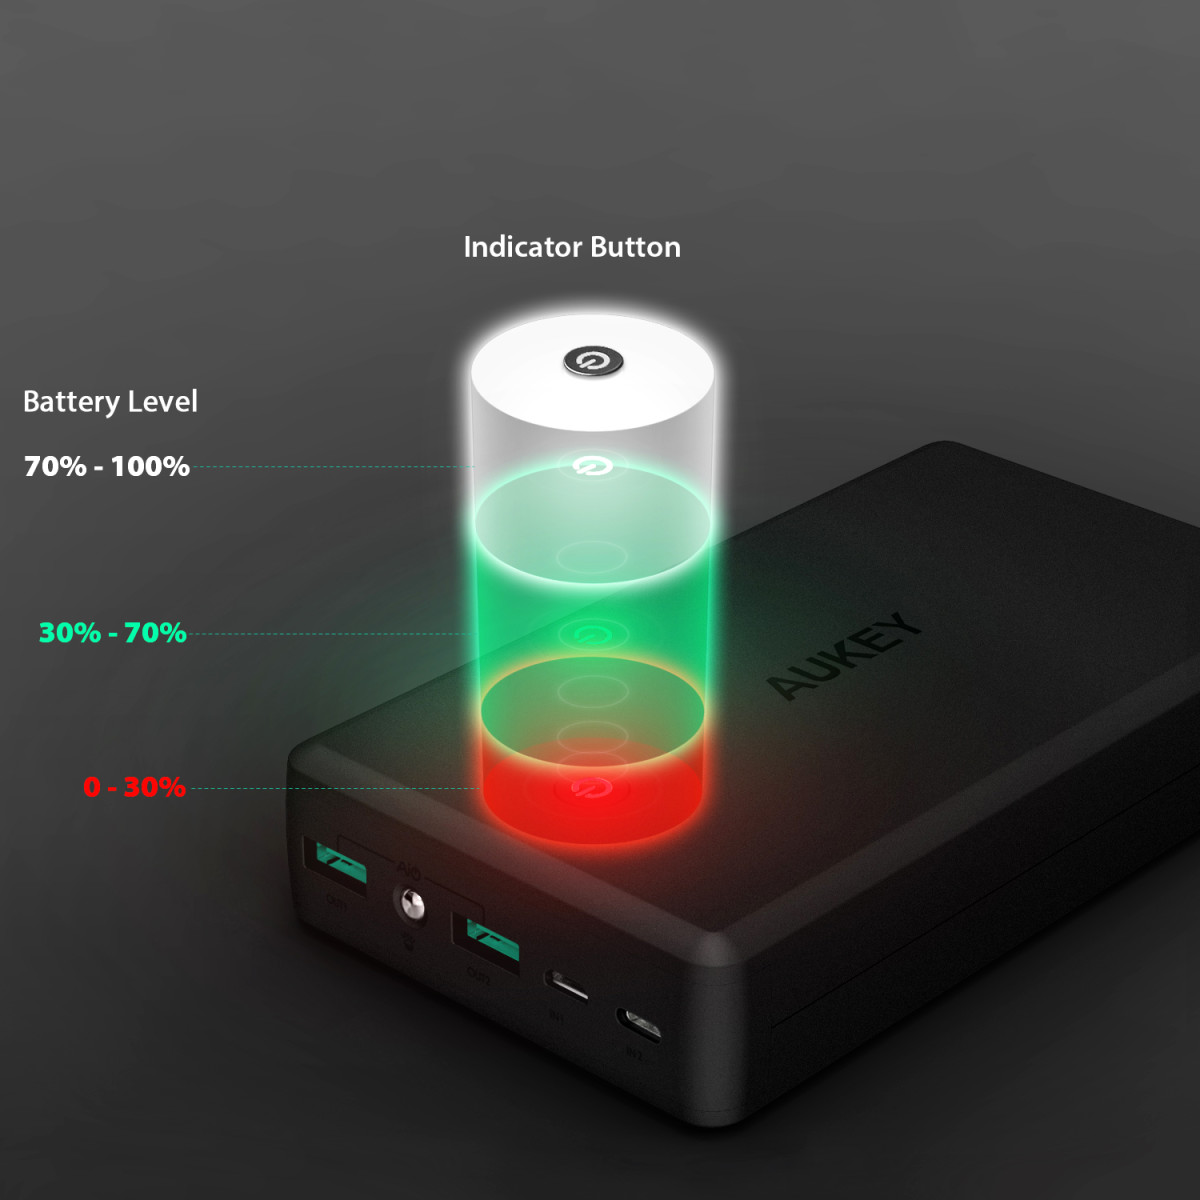 aukey-pb-t11-30-000-mah-portable-charger-with-quick-charge-30-and-lightning-input